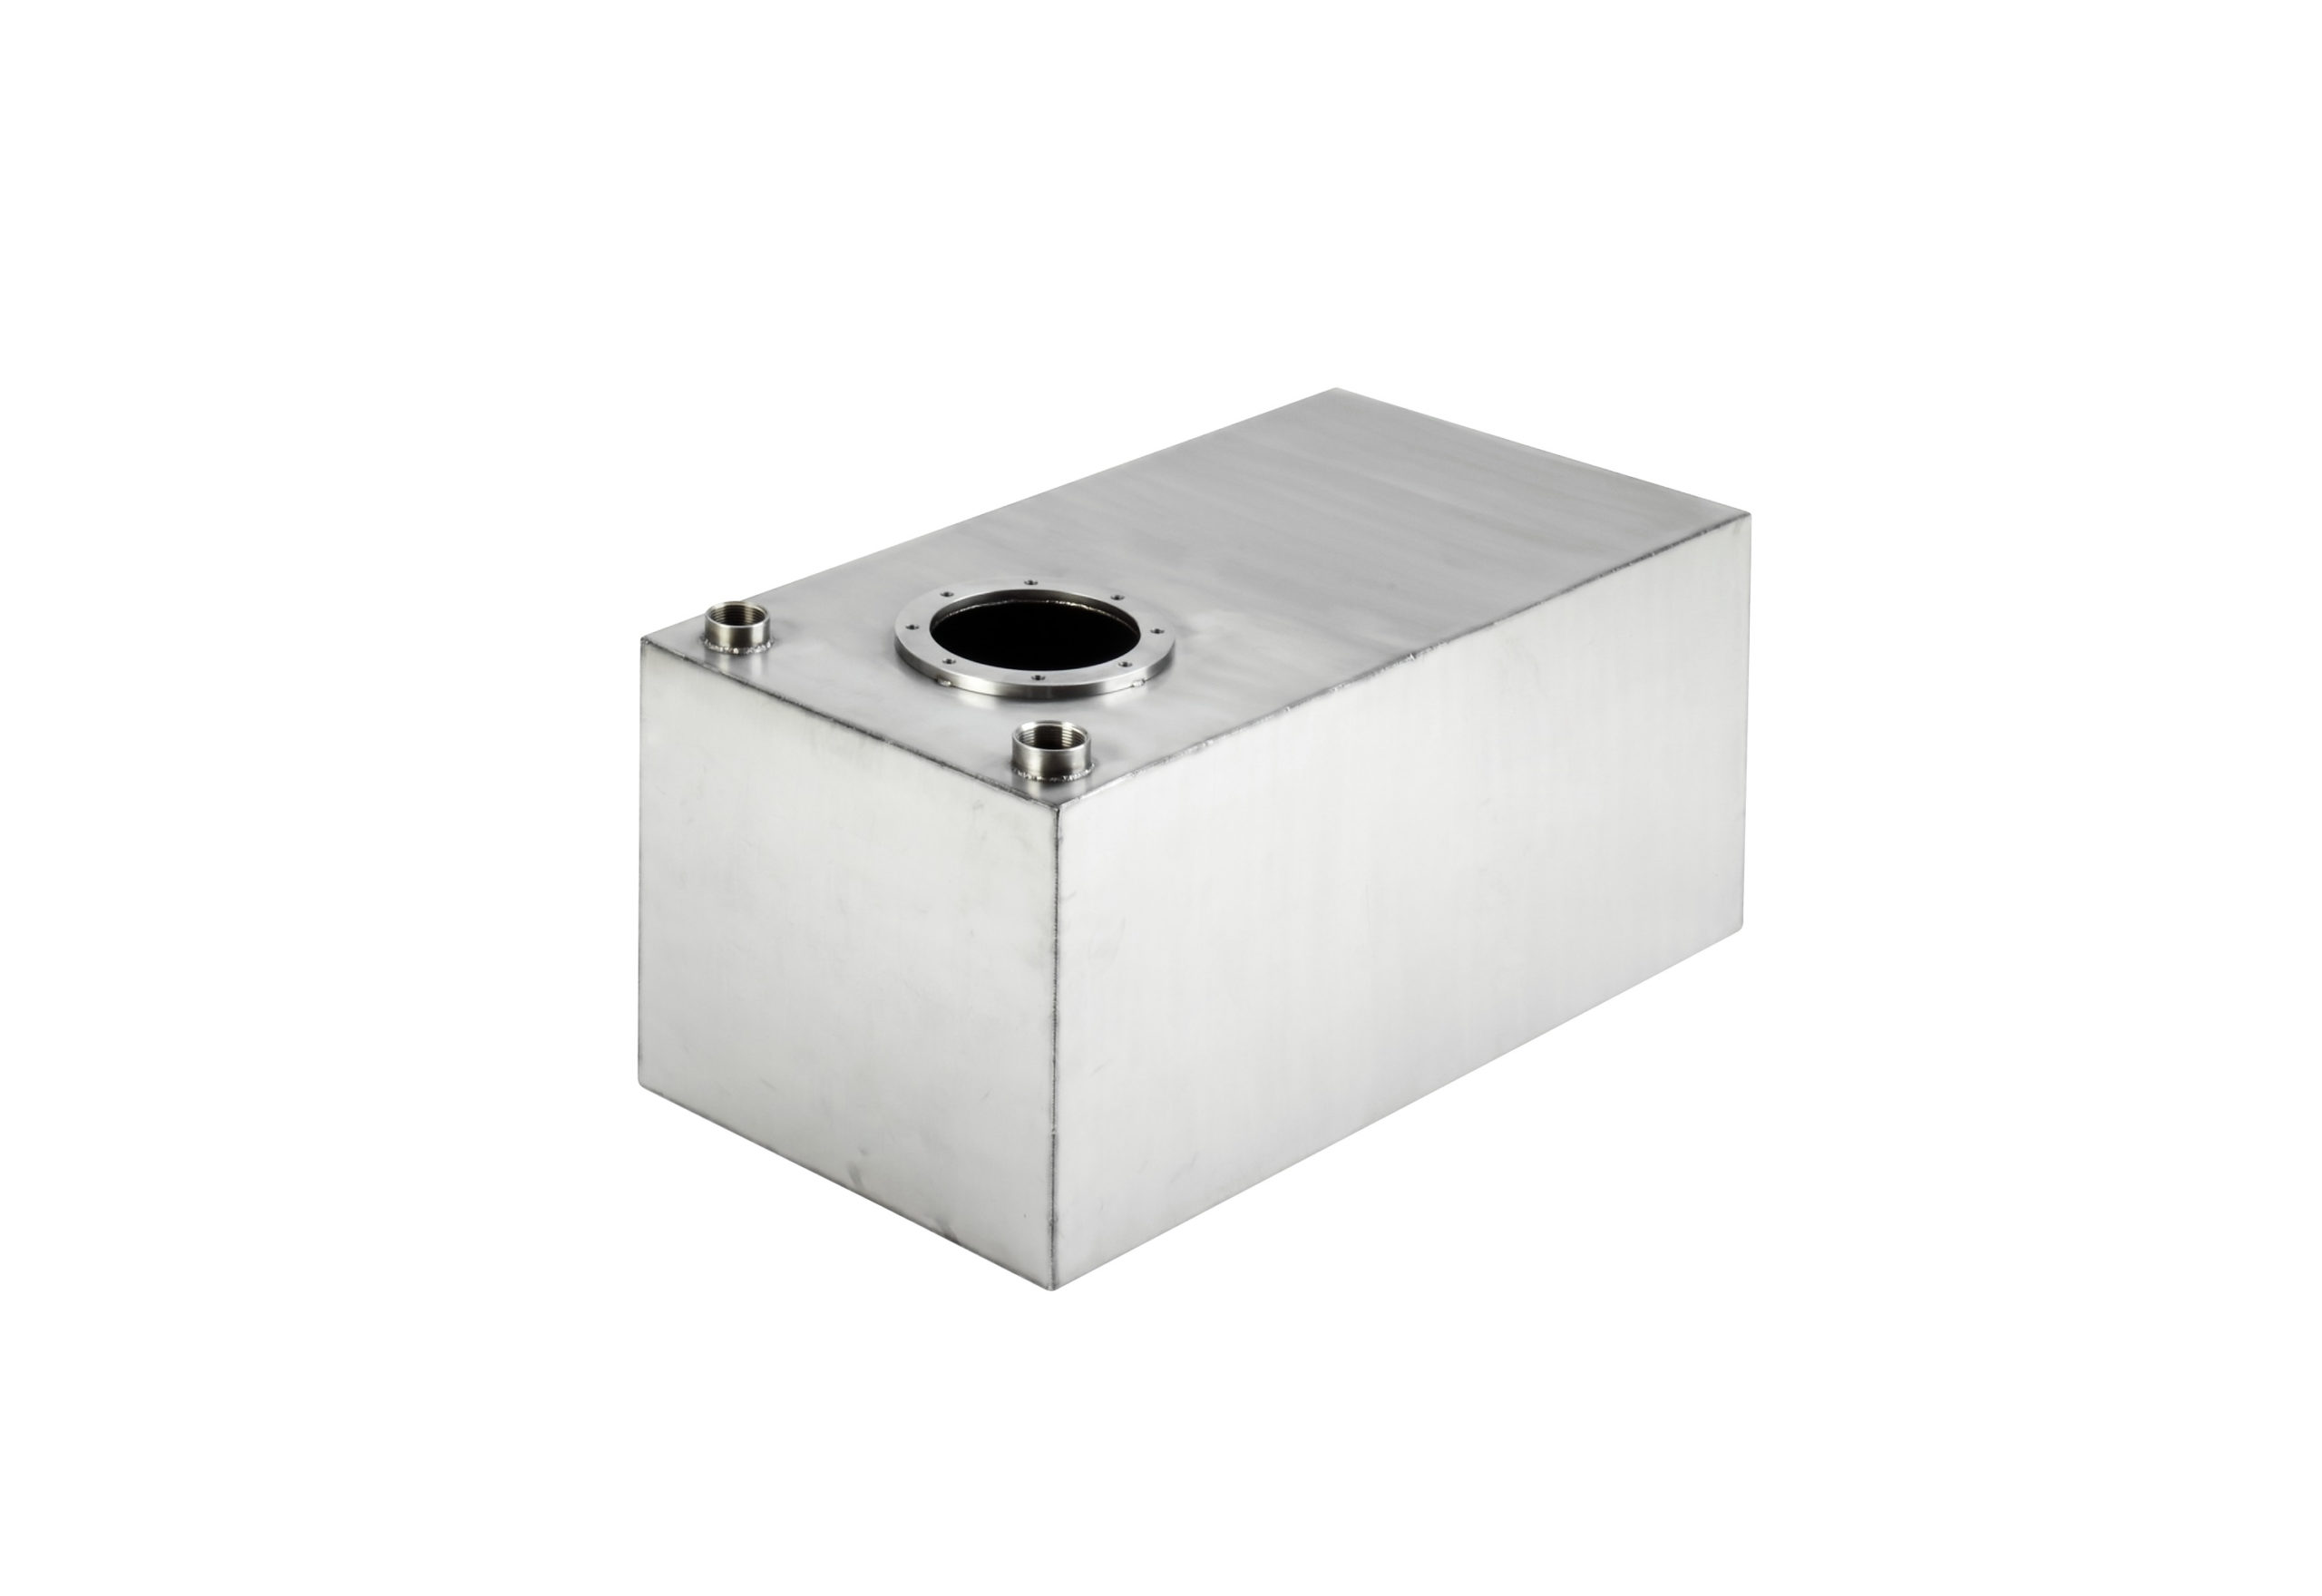 100 Litre Stainless Steel Tank - Drinking Water or Waste Water